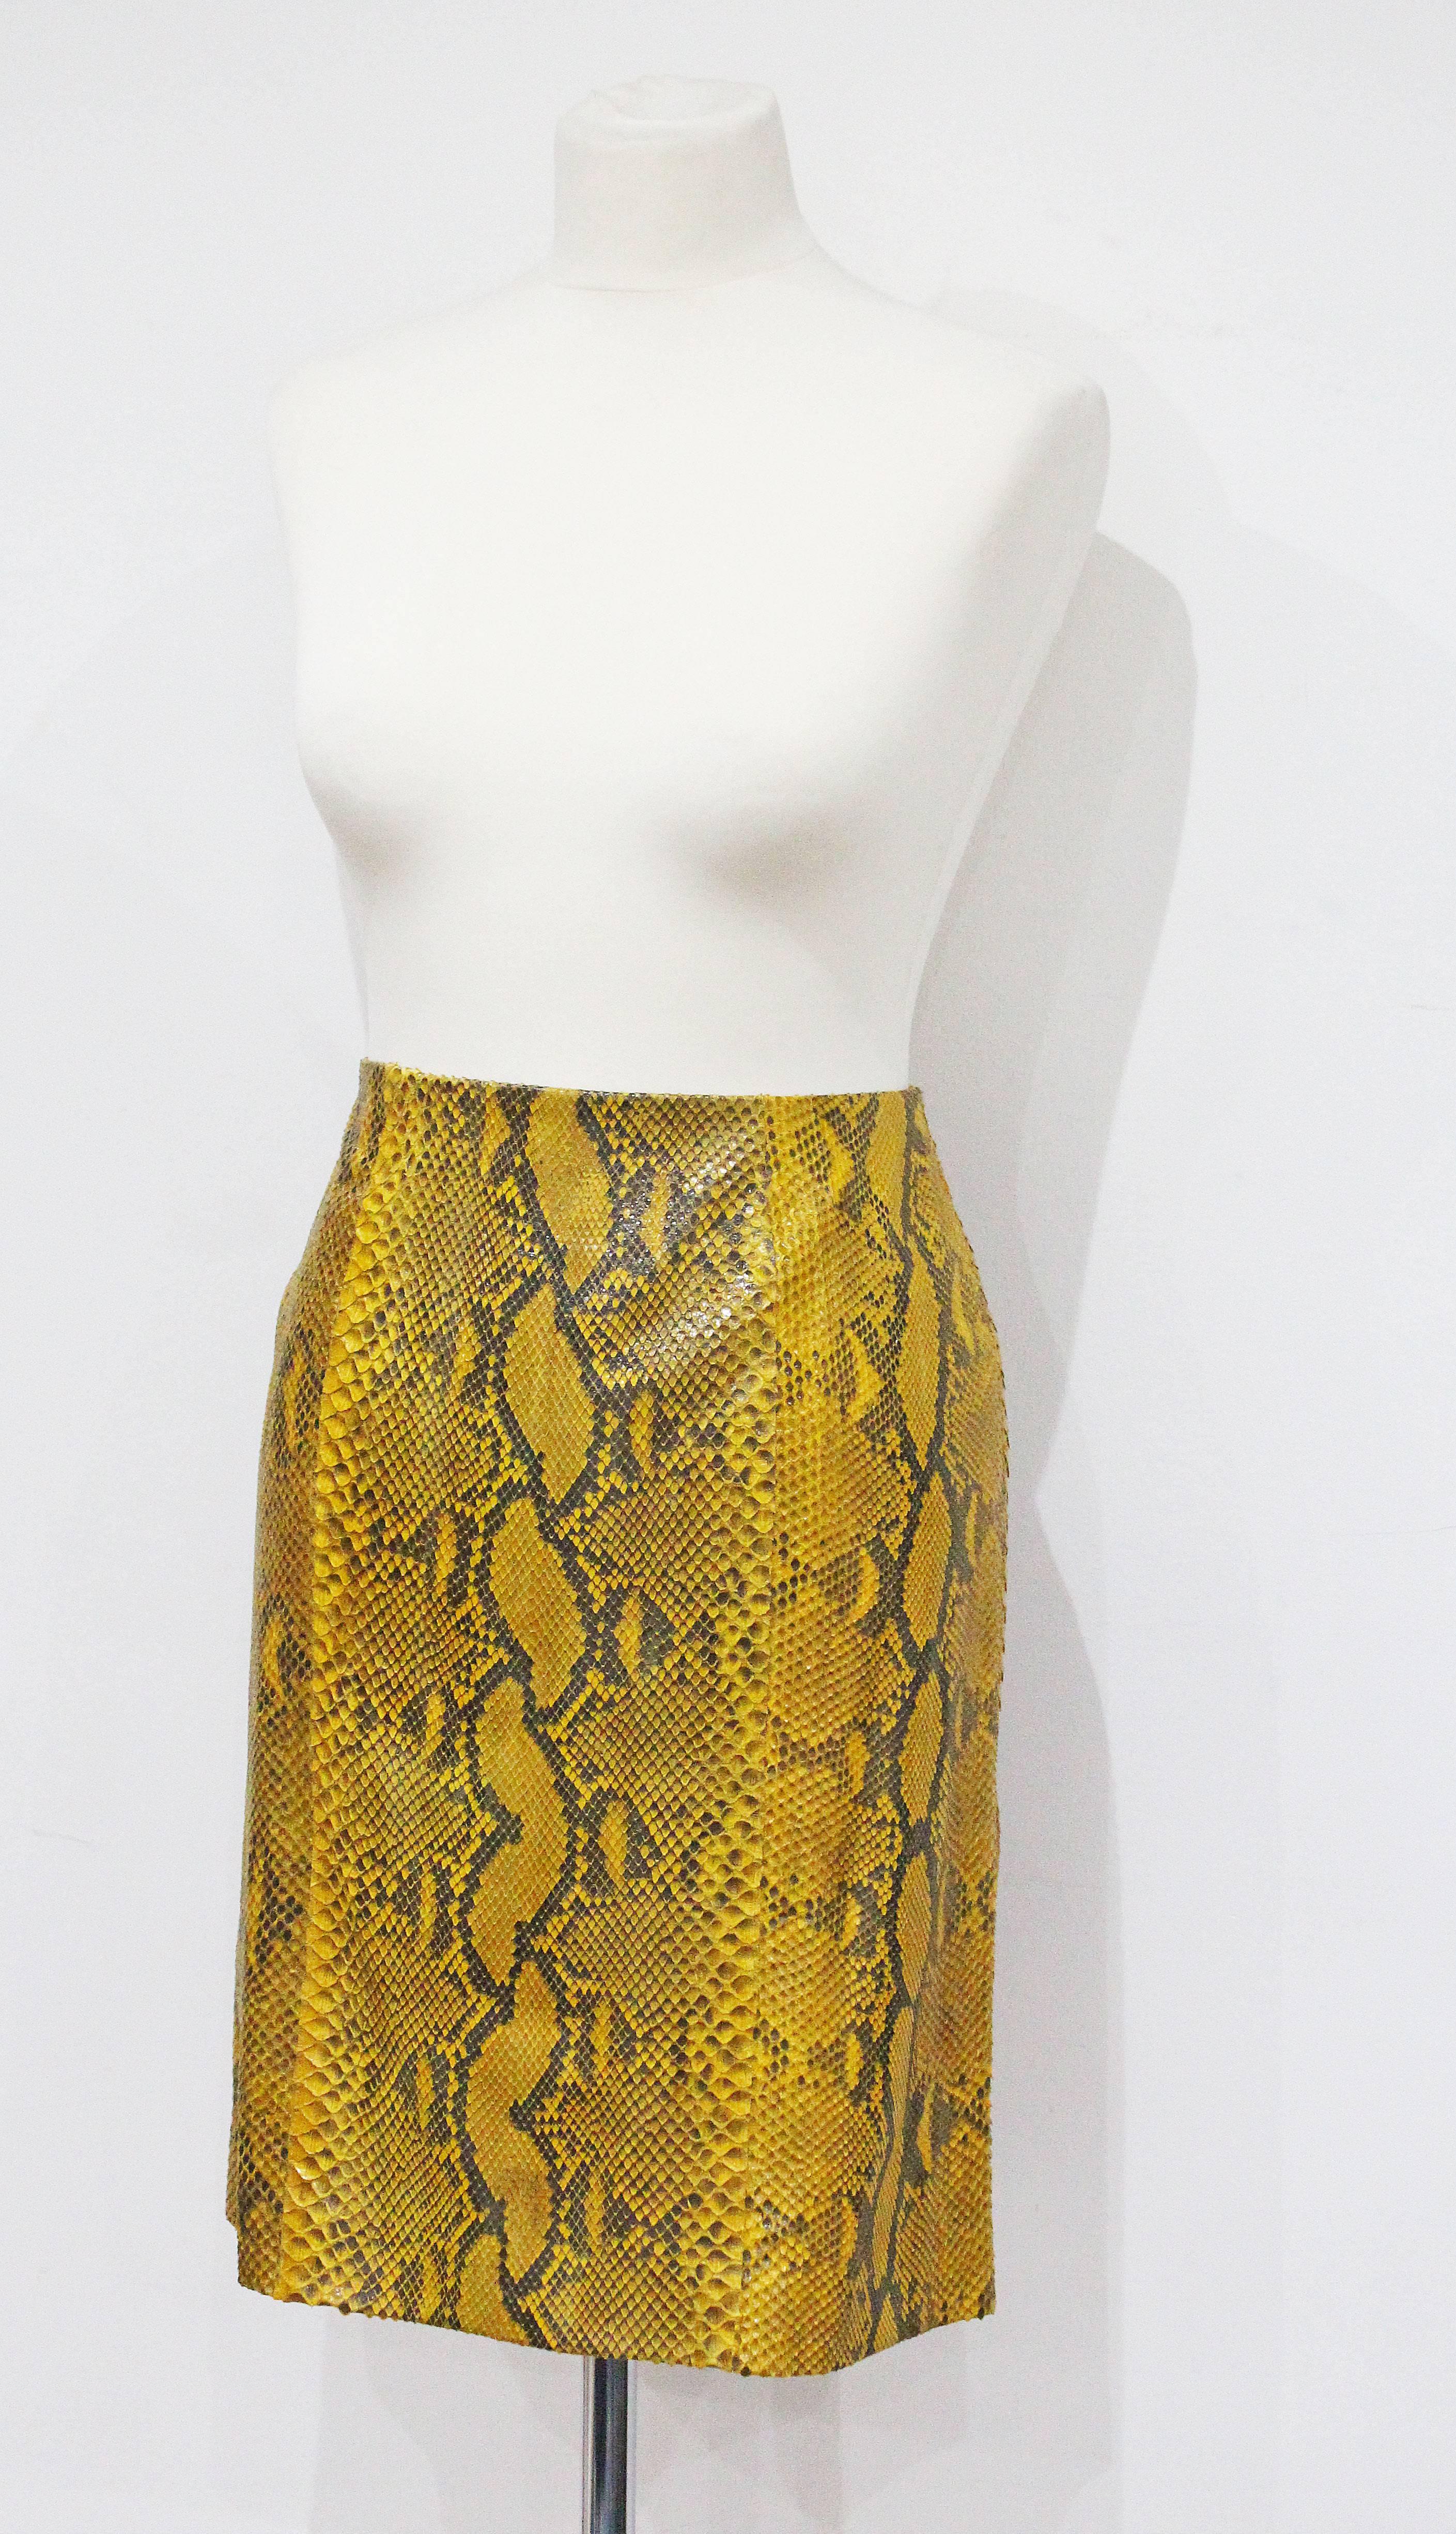 A Gianifranco Ferre pencil skirt from the 1990s in yellow python skin. 

It 44 - French 40 